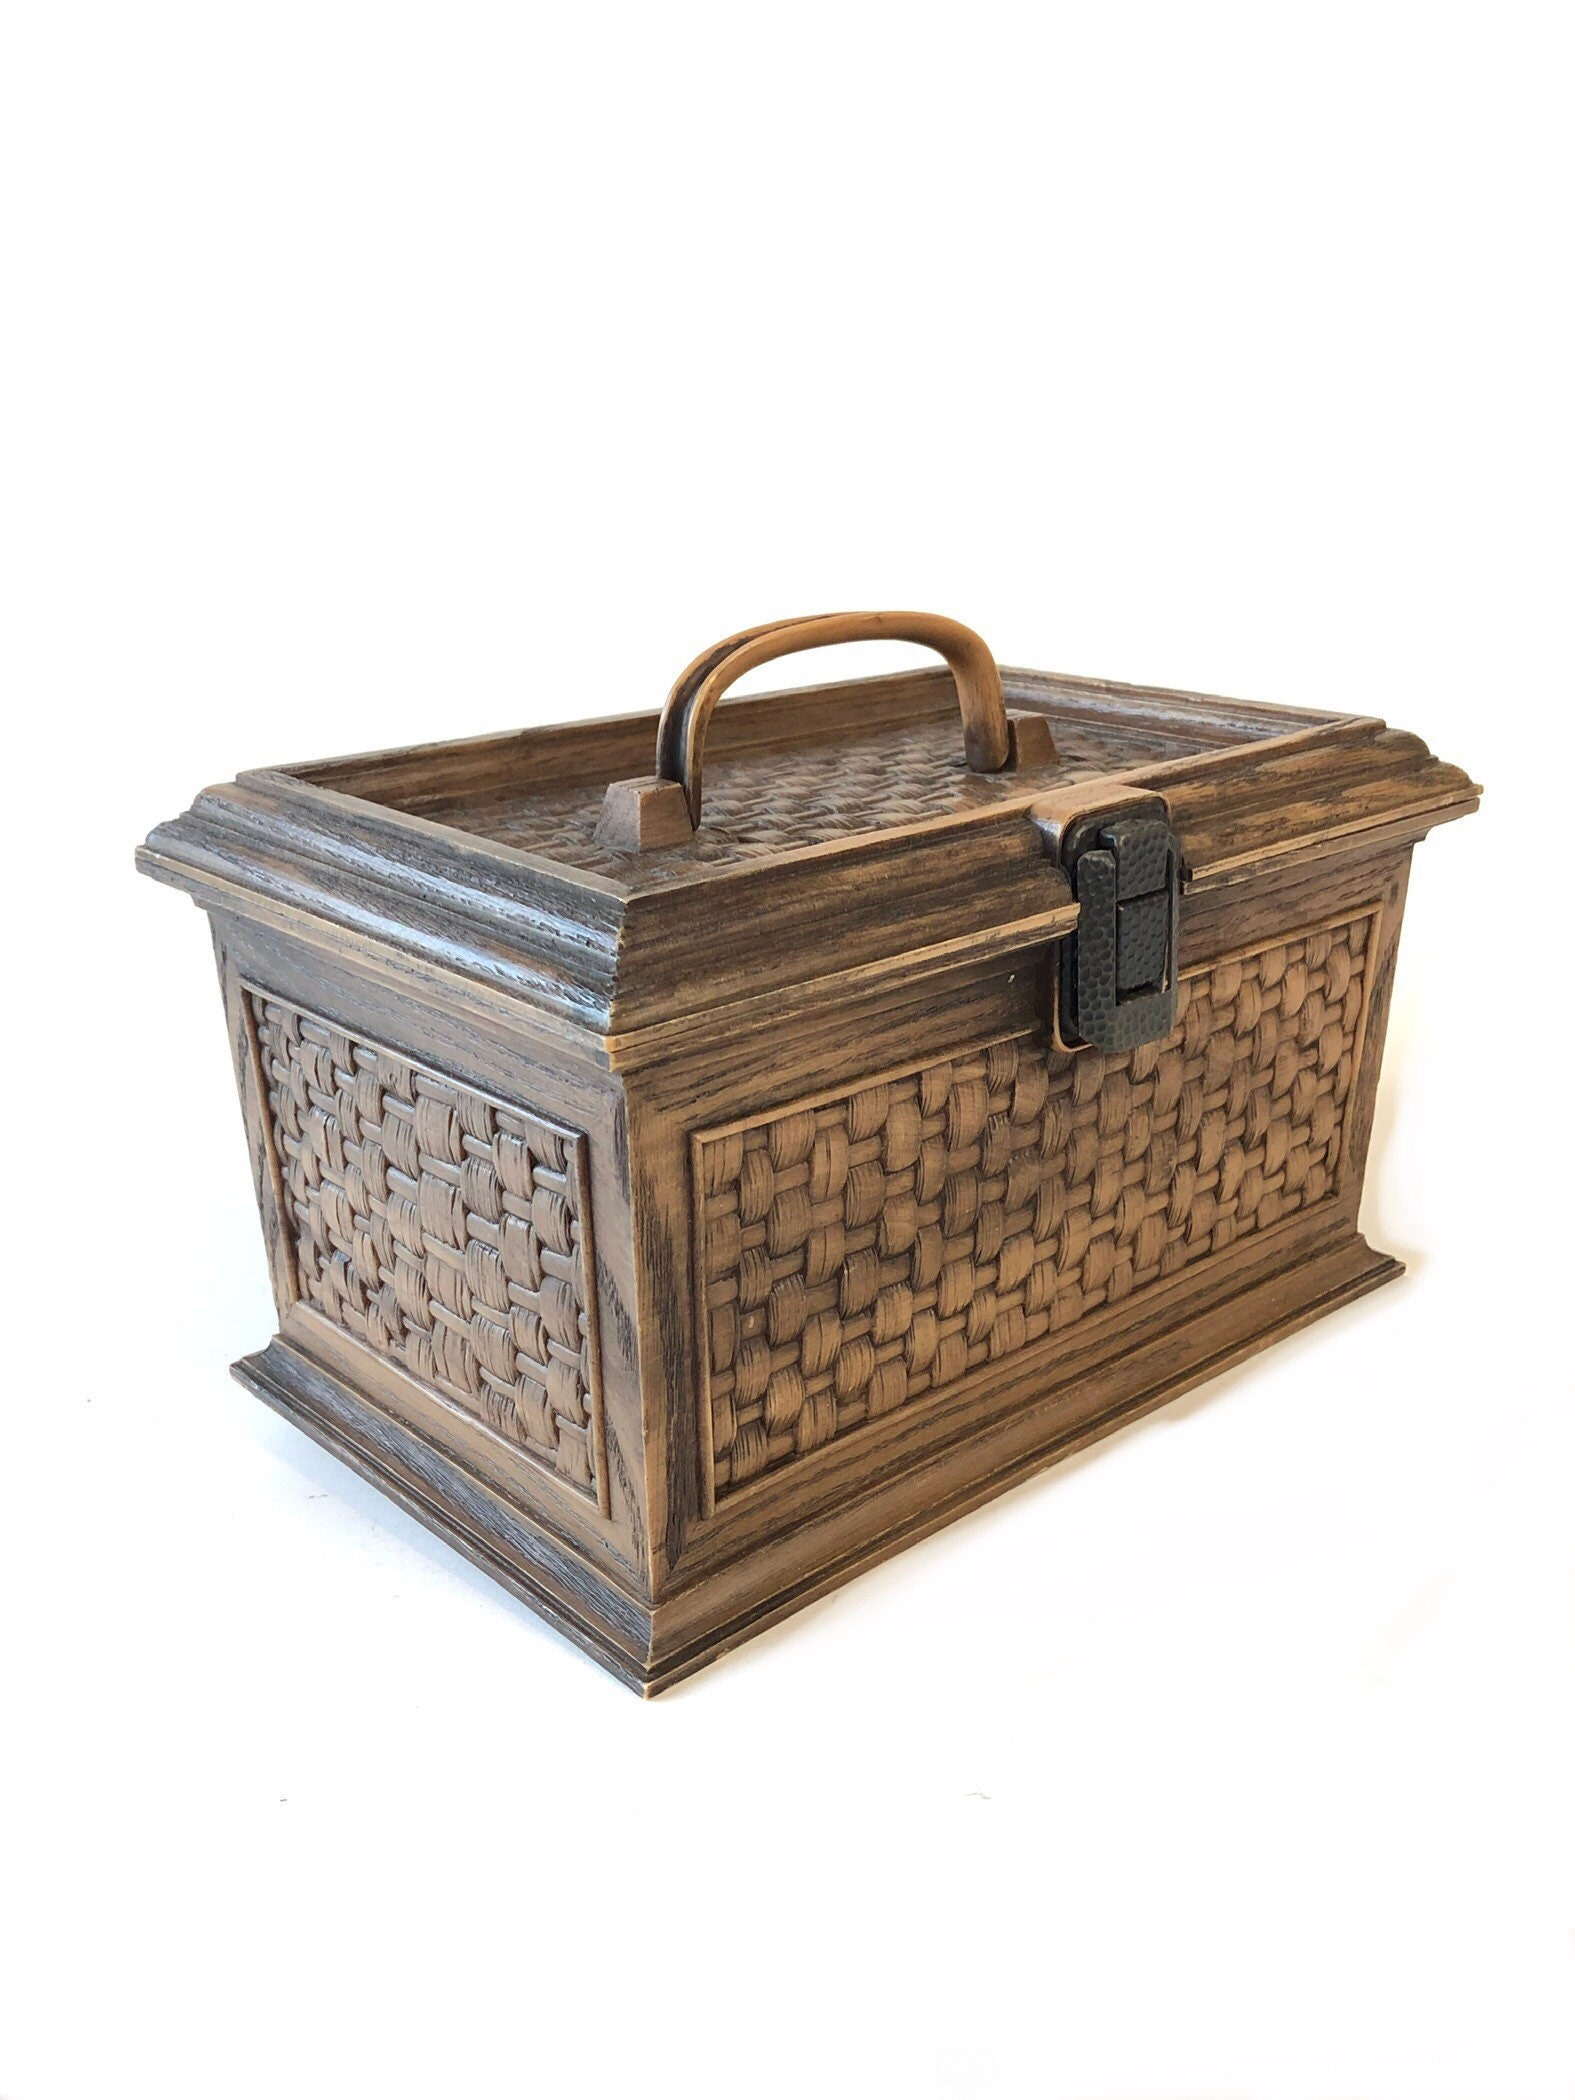 Vintage 70s Plastic SEWING BASKET Brown Lerner Brand Faux Wood Wicker Carry  CASE Storage Box Tiered Tray Train Cosmetics Make up Craft Bin 